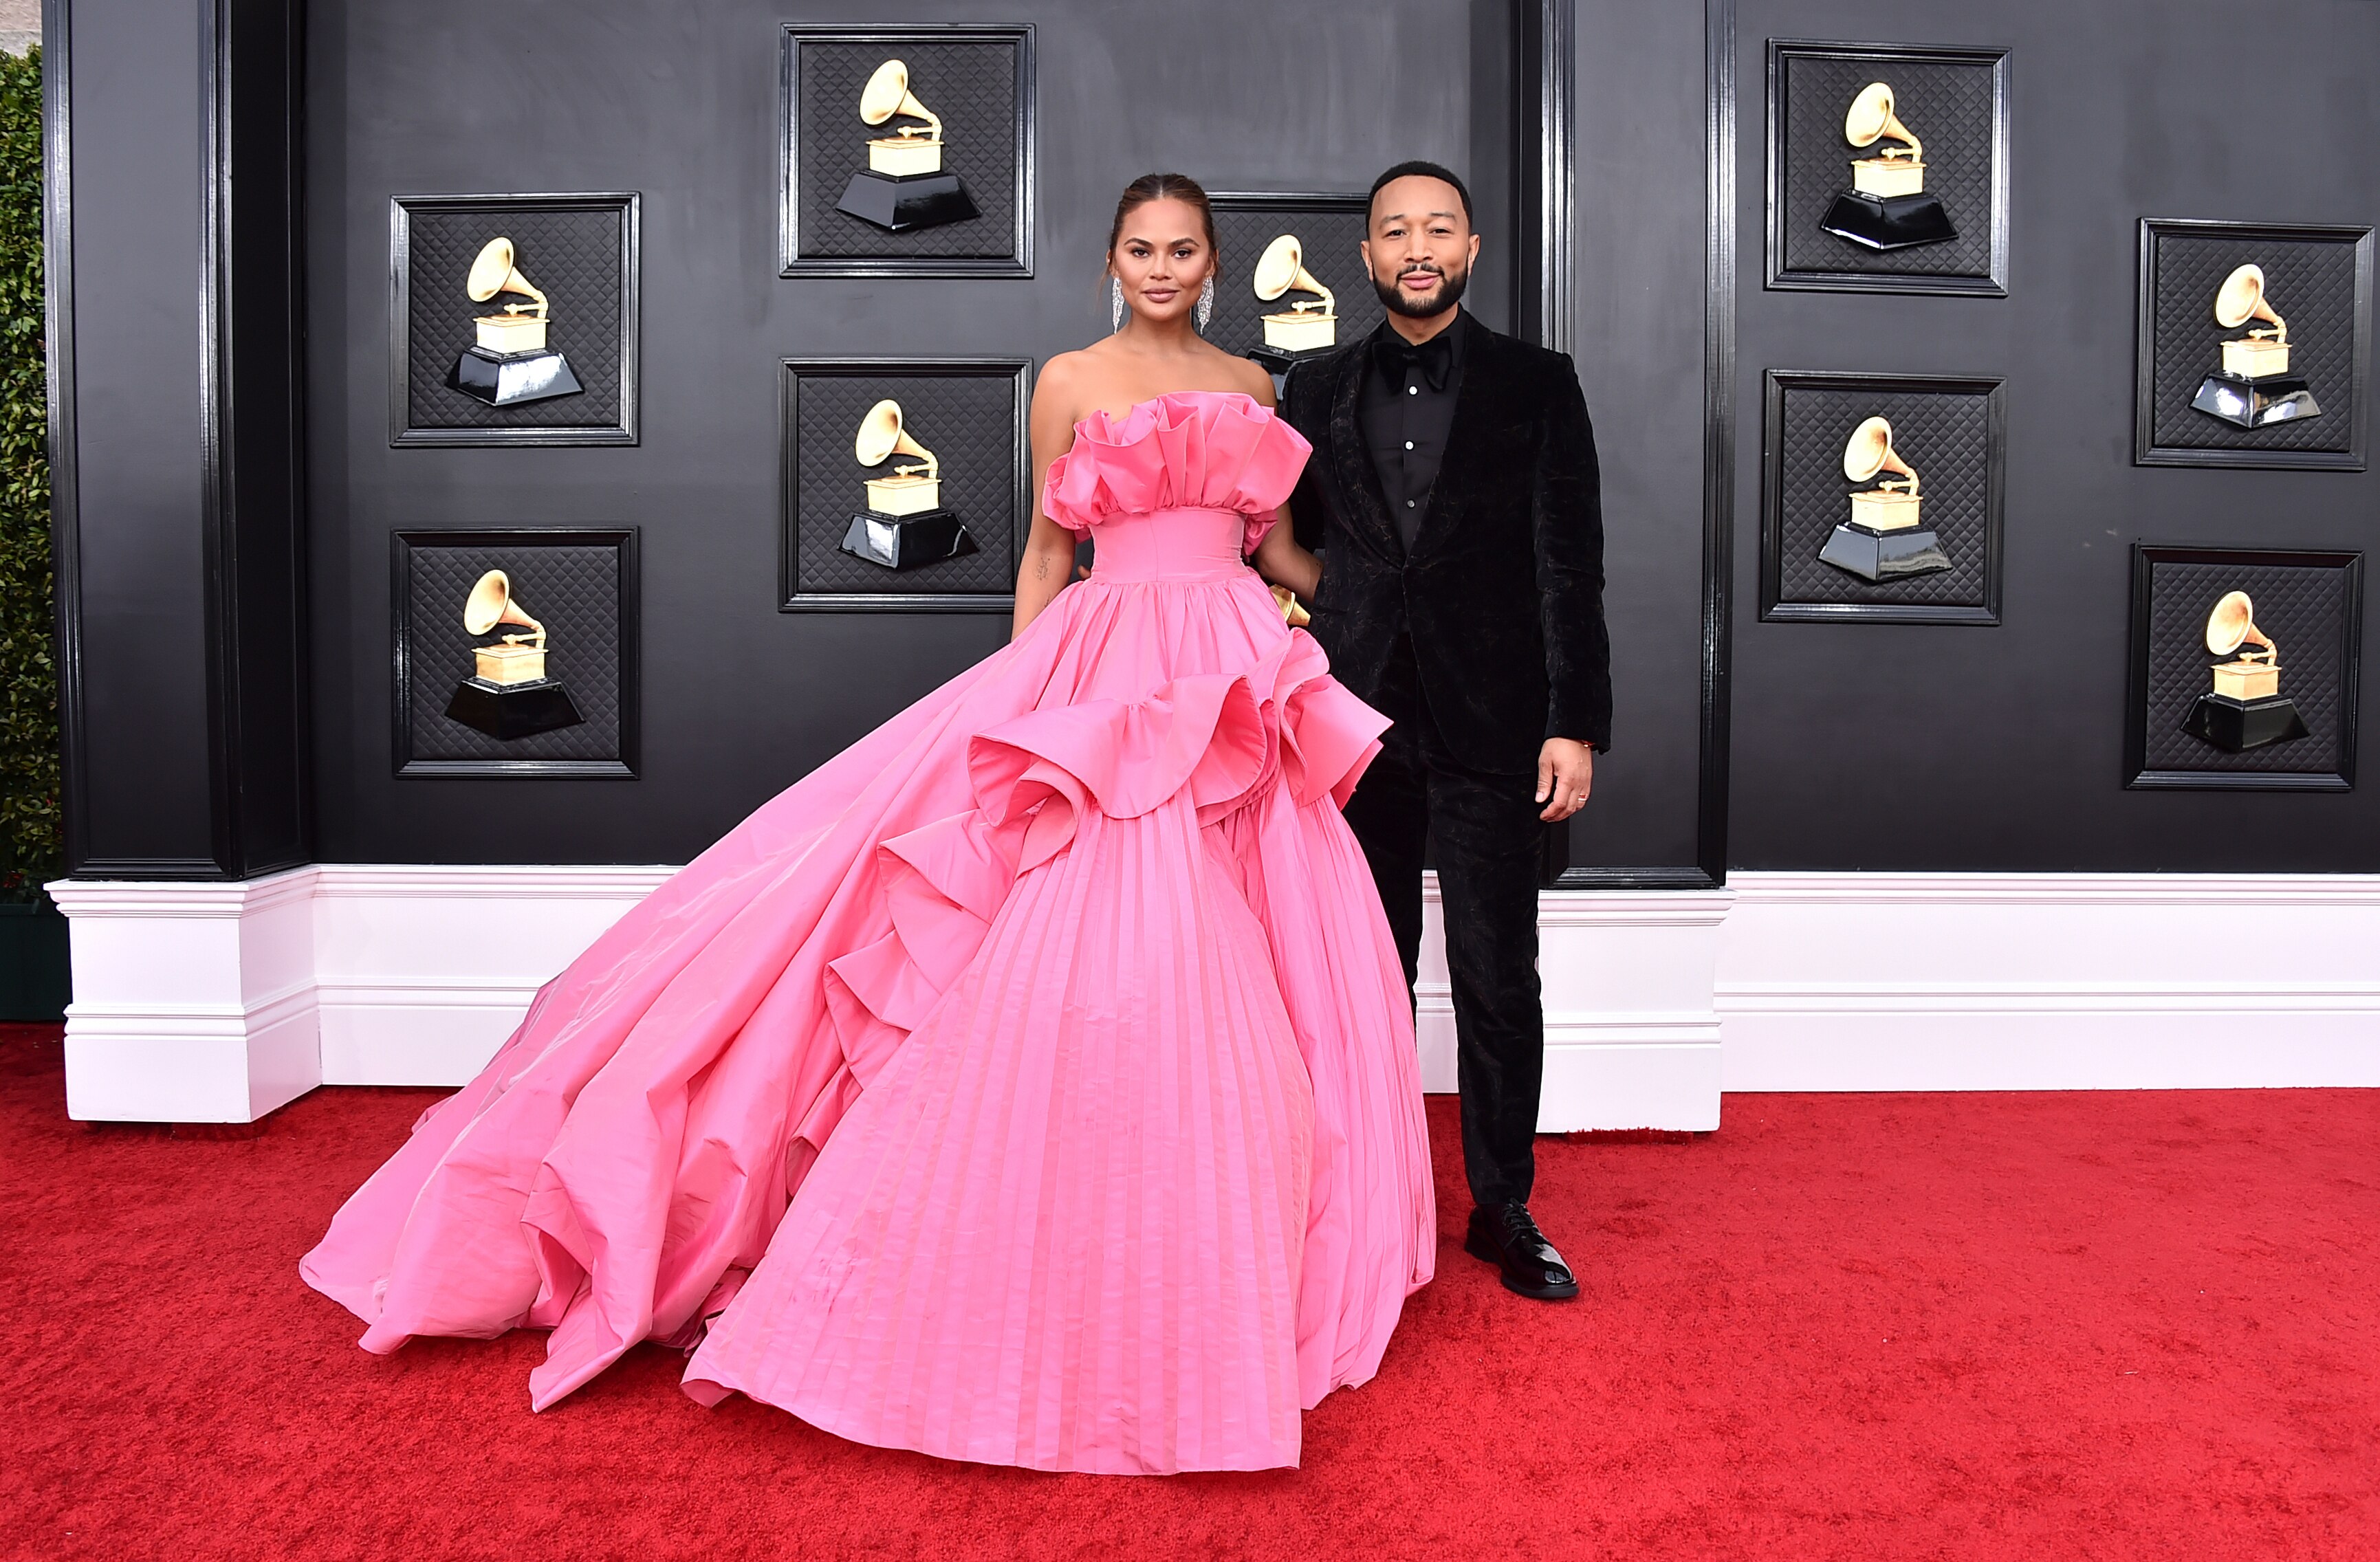 chrissy tiegen on the red carpet in a long full hot pink dress with john legend in a plain black suit